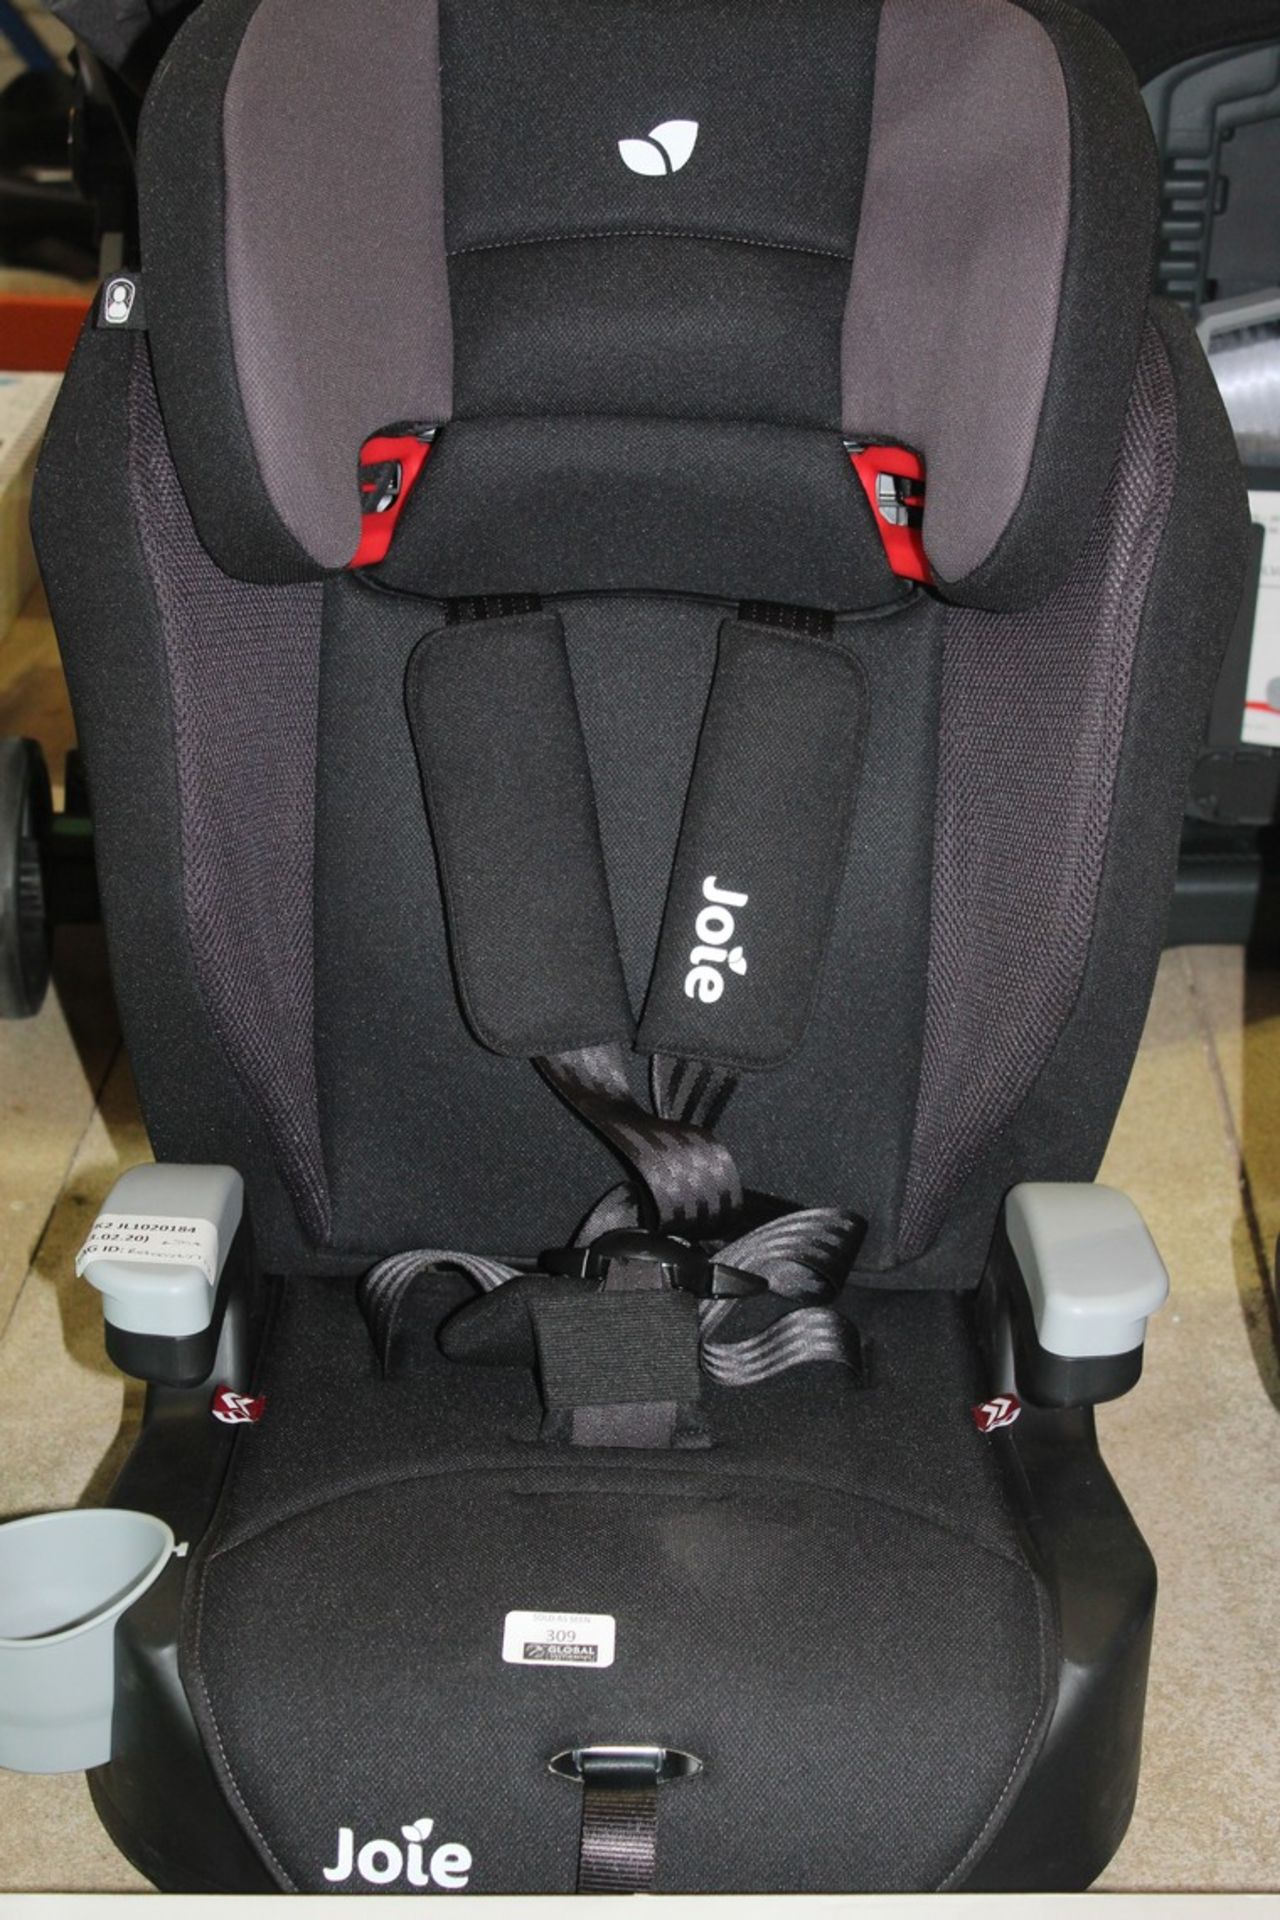 Joey In Car Children's Safety Seat, RRP£60.00 (RET00363718) (Public Viewing and Appraisals